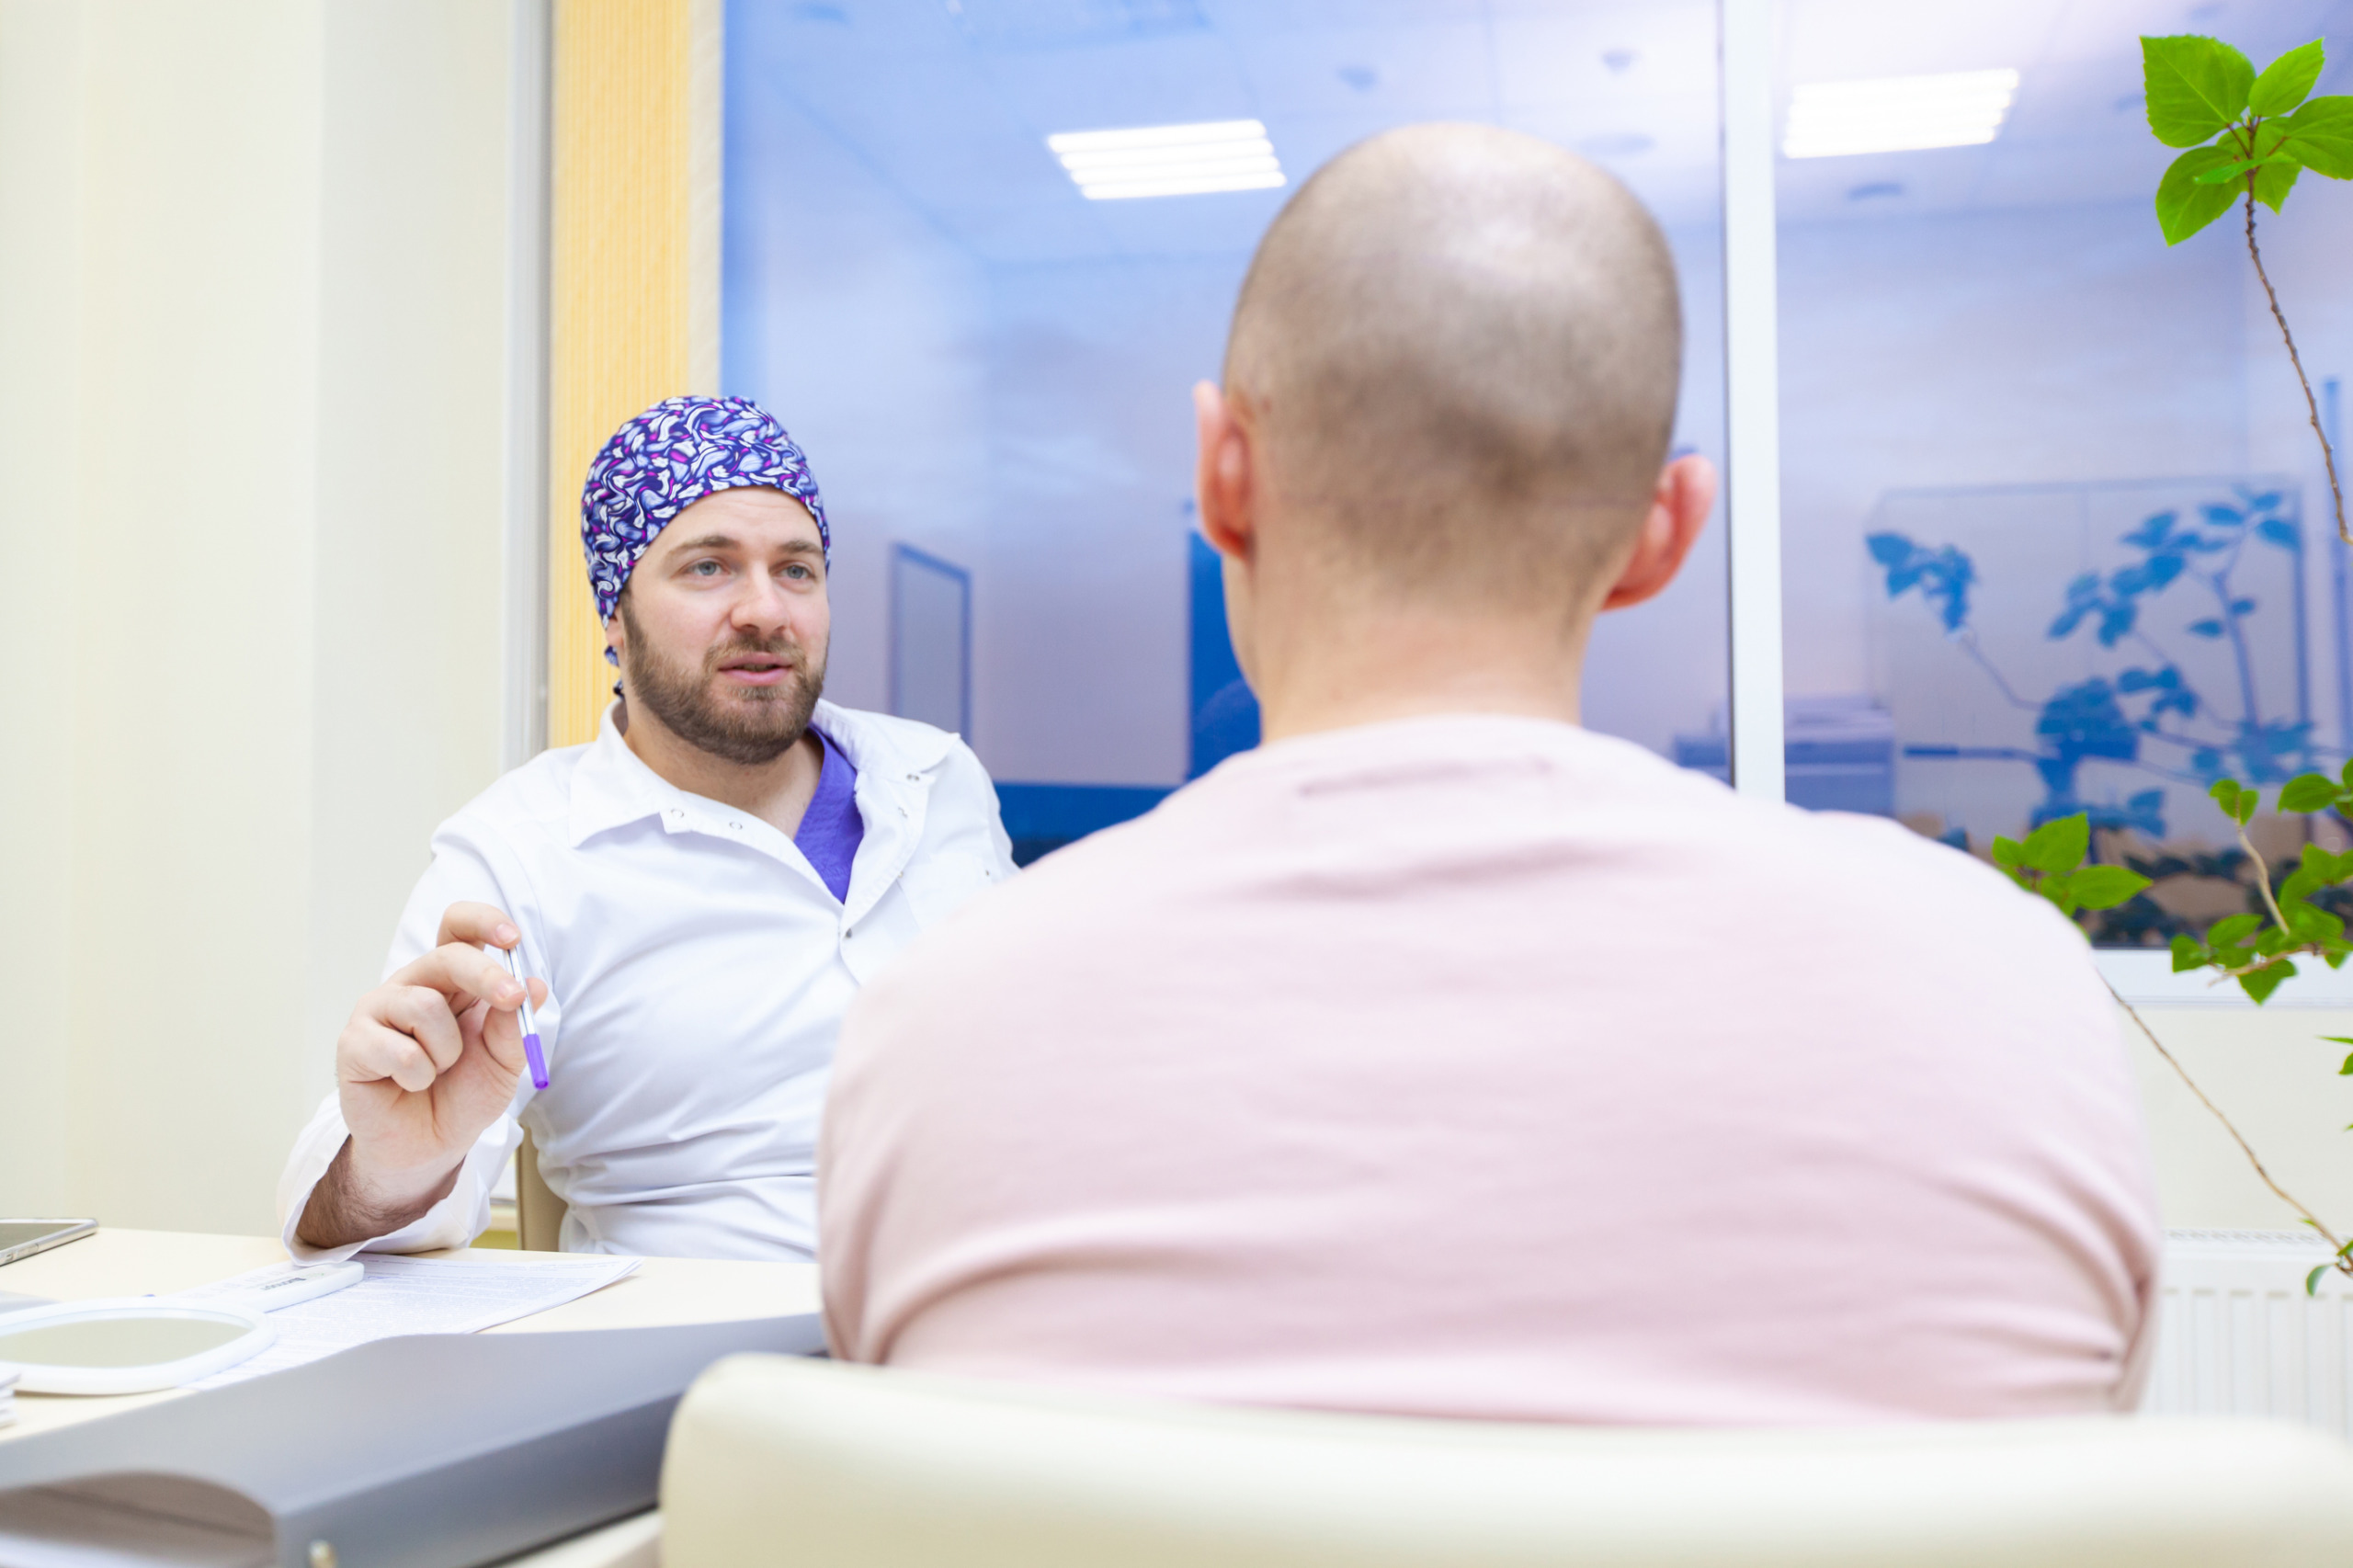 bald patient consulting with a doctor